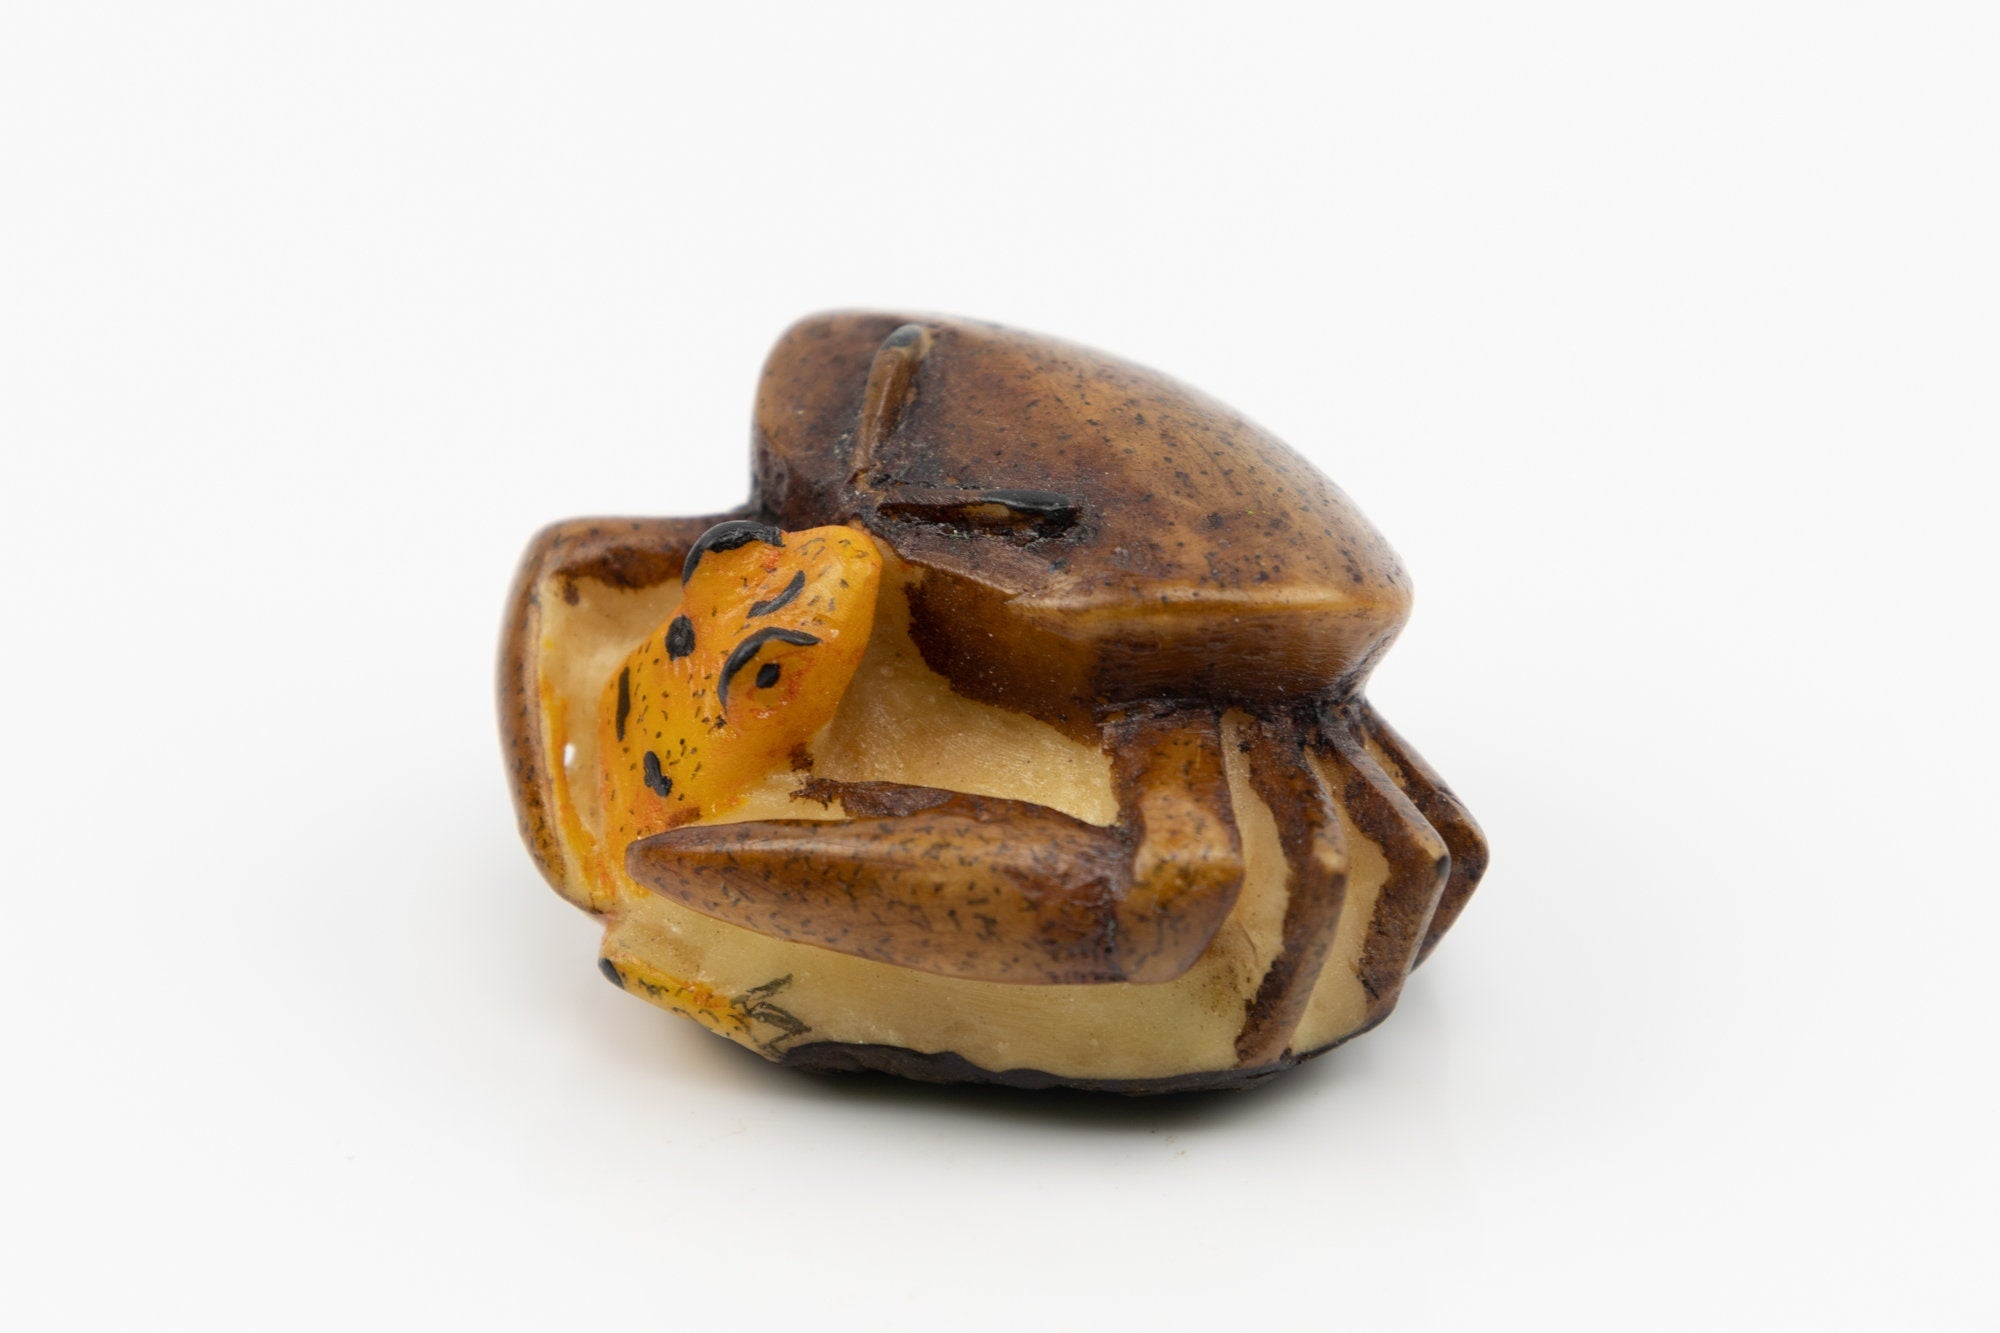 Vintage Crab Golden Frog Tagua Nut Made By Wounaan And Emberá Panama Indians. Animal Statue, Vegetable Ivory, Carving Miniature, Figurine